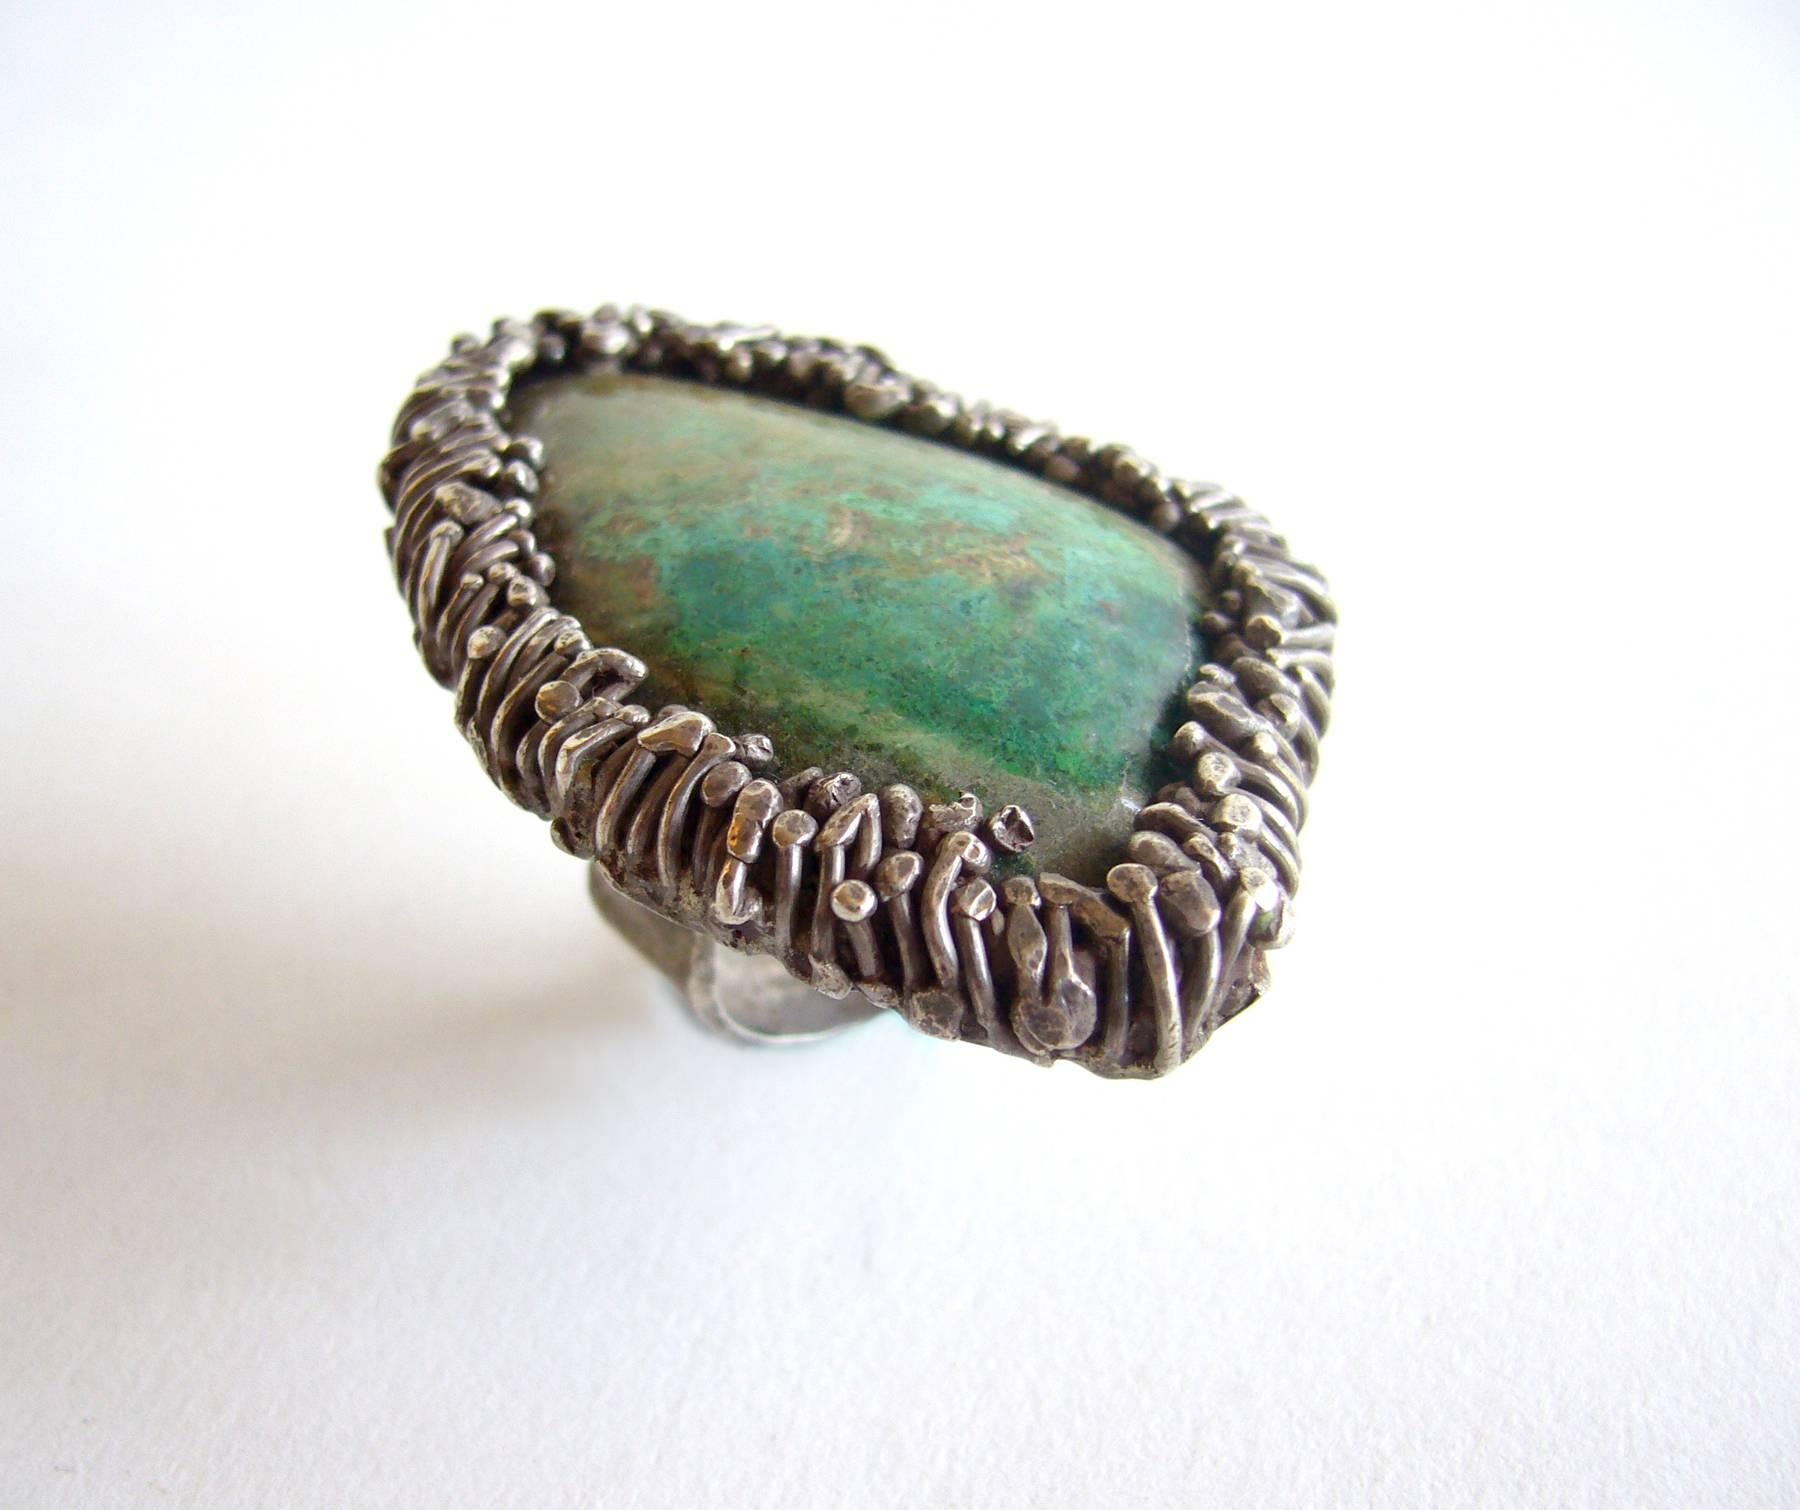 Large natural turquoise stone set in a silver textured frame created by Pal Kepenyes of Acapulco, Mexico.  Ring is a finger size 6 while the top of the ring measures 2